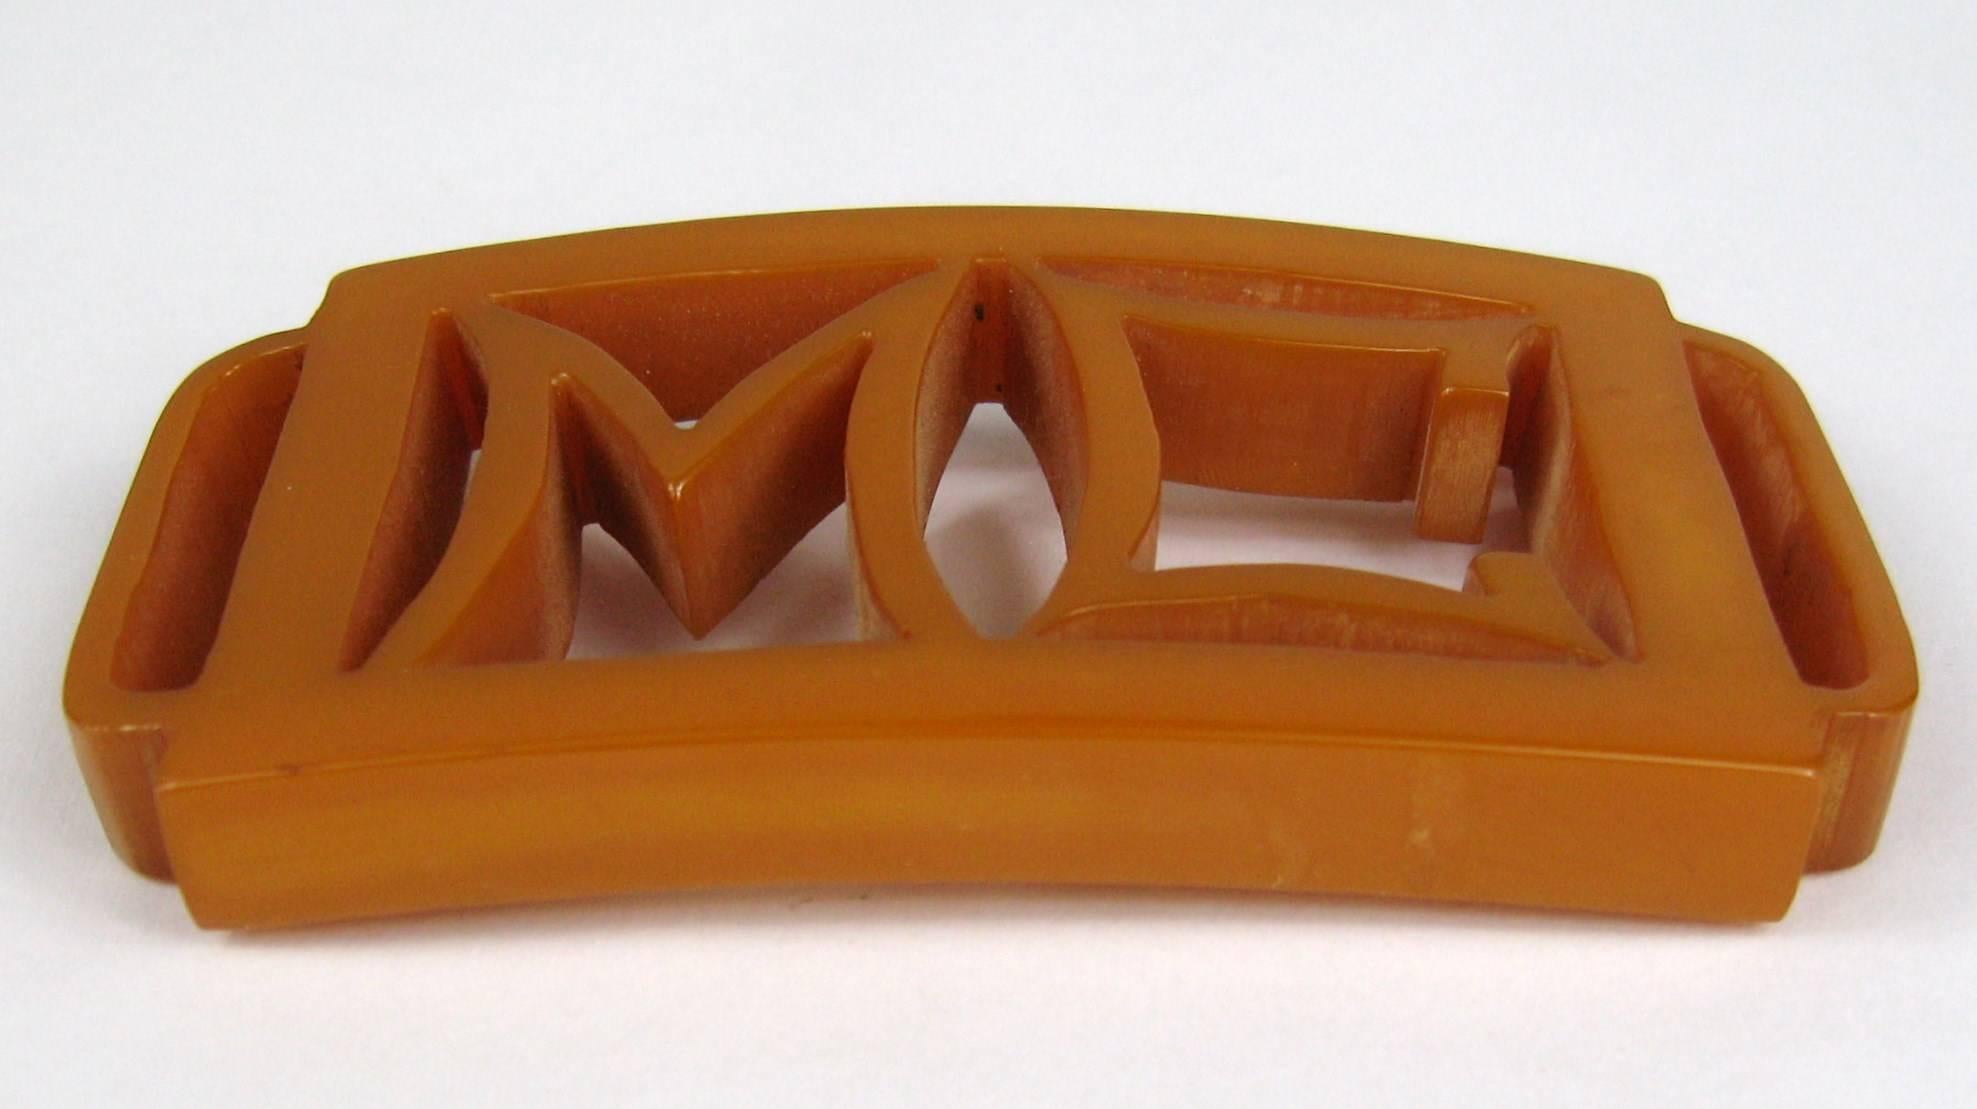 Stunning early Bakelite / Catalin Belt Buckle, Hand Carved. Initials are M C. This is a true piece of bakelite circa 1930's. It measures 3.65 inches x 2 inches. This is out of a massive collection of Hopi, Zuni, Navajo, Southwestern, sterling